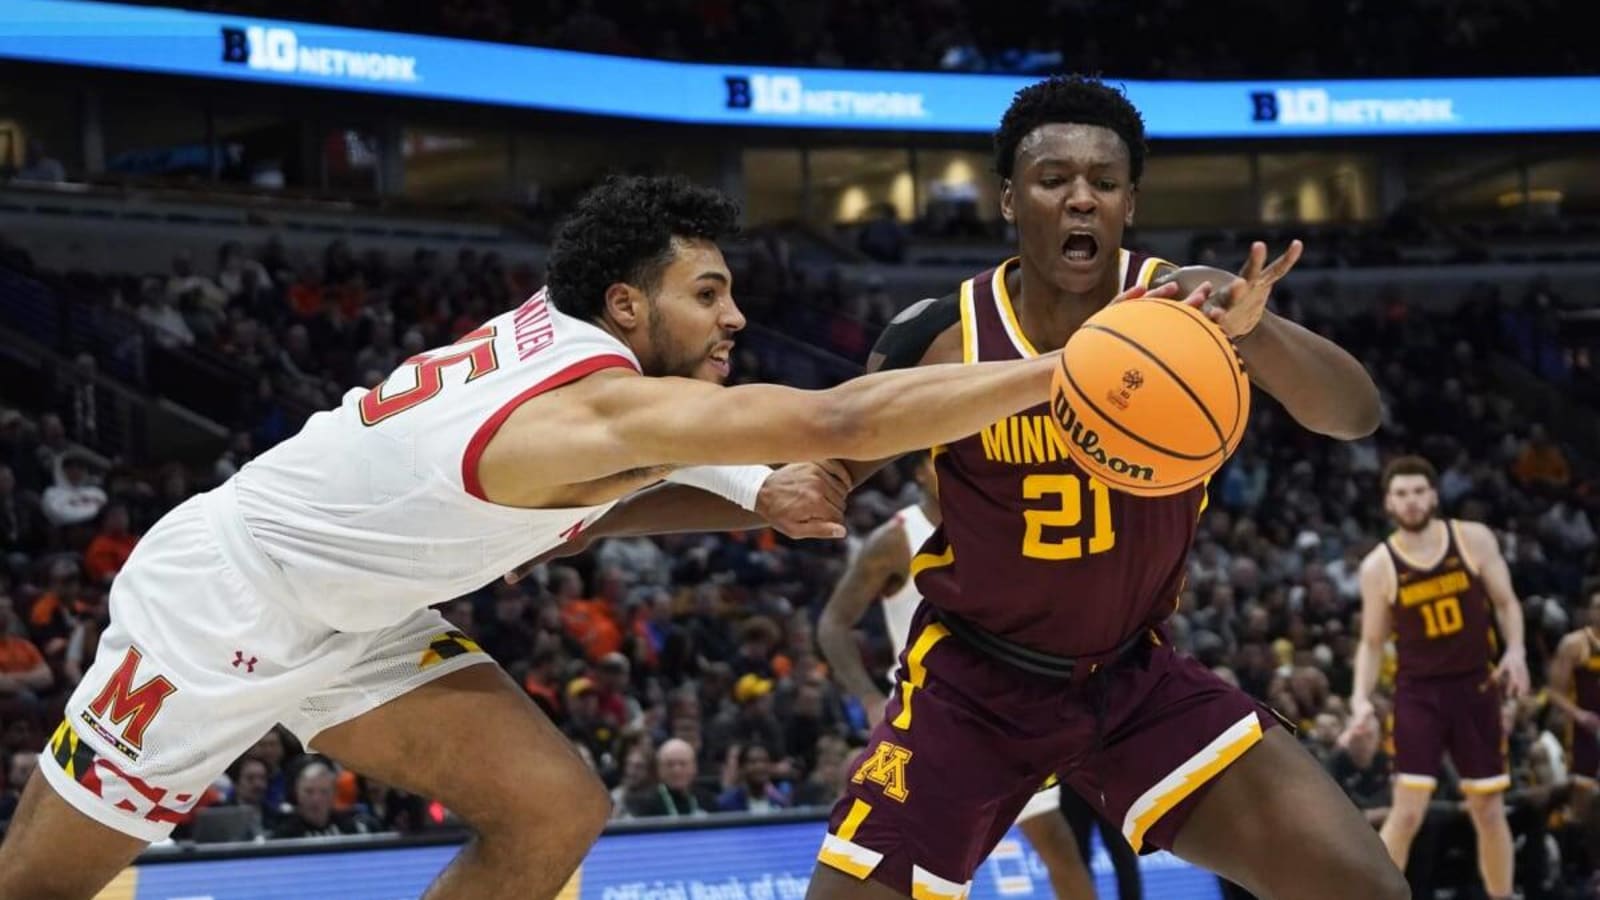 Gophers&#39; season ends with Big Ten tourney loss to Maryland